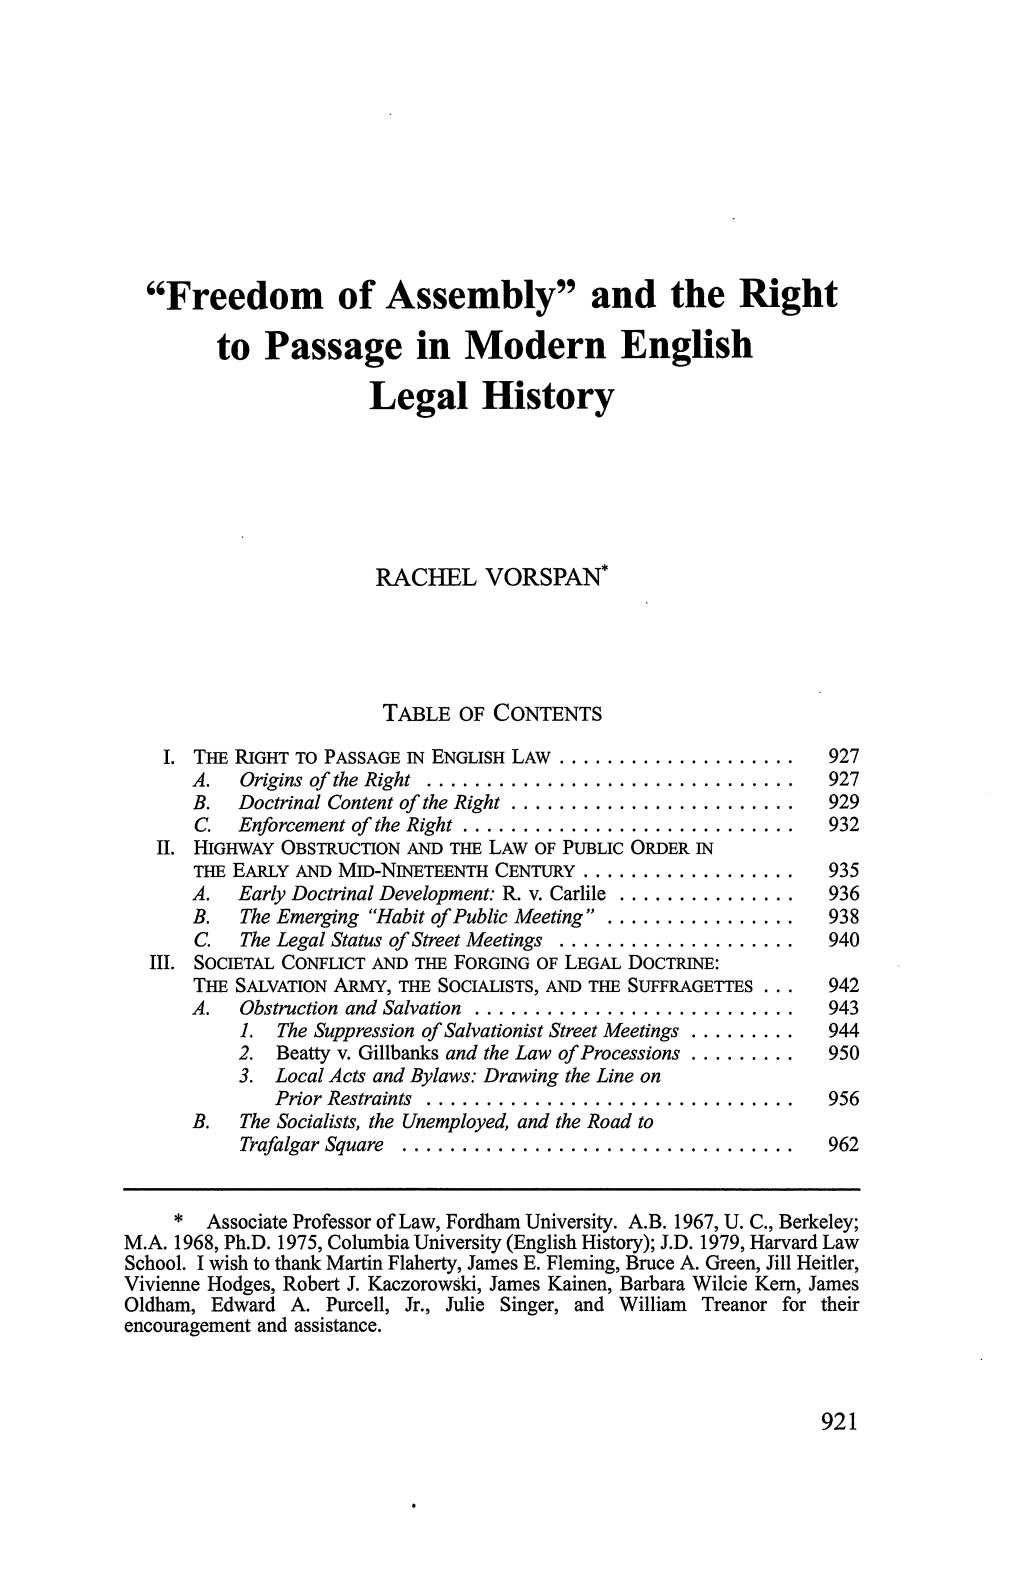 "Freedom of Assembly" and the Right to Passage in Modern English Legal History